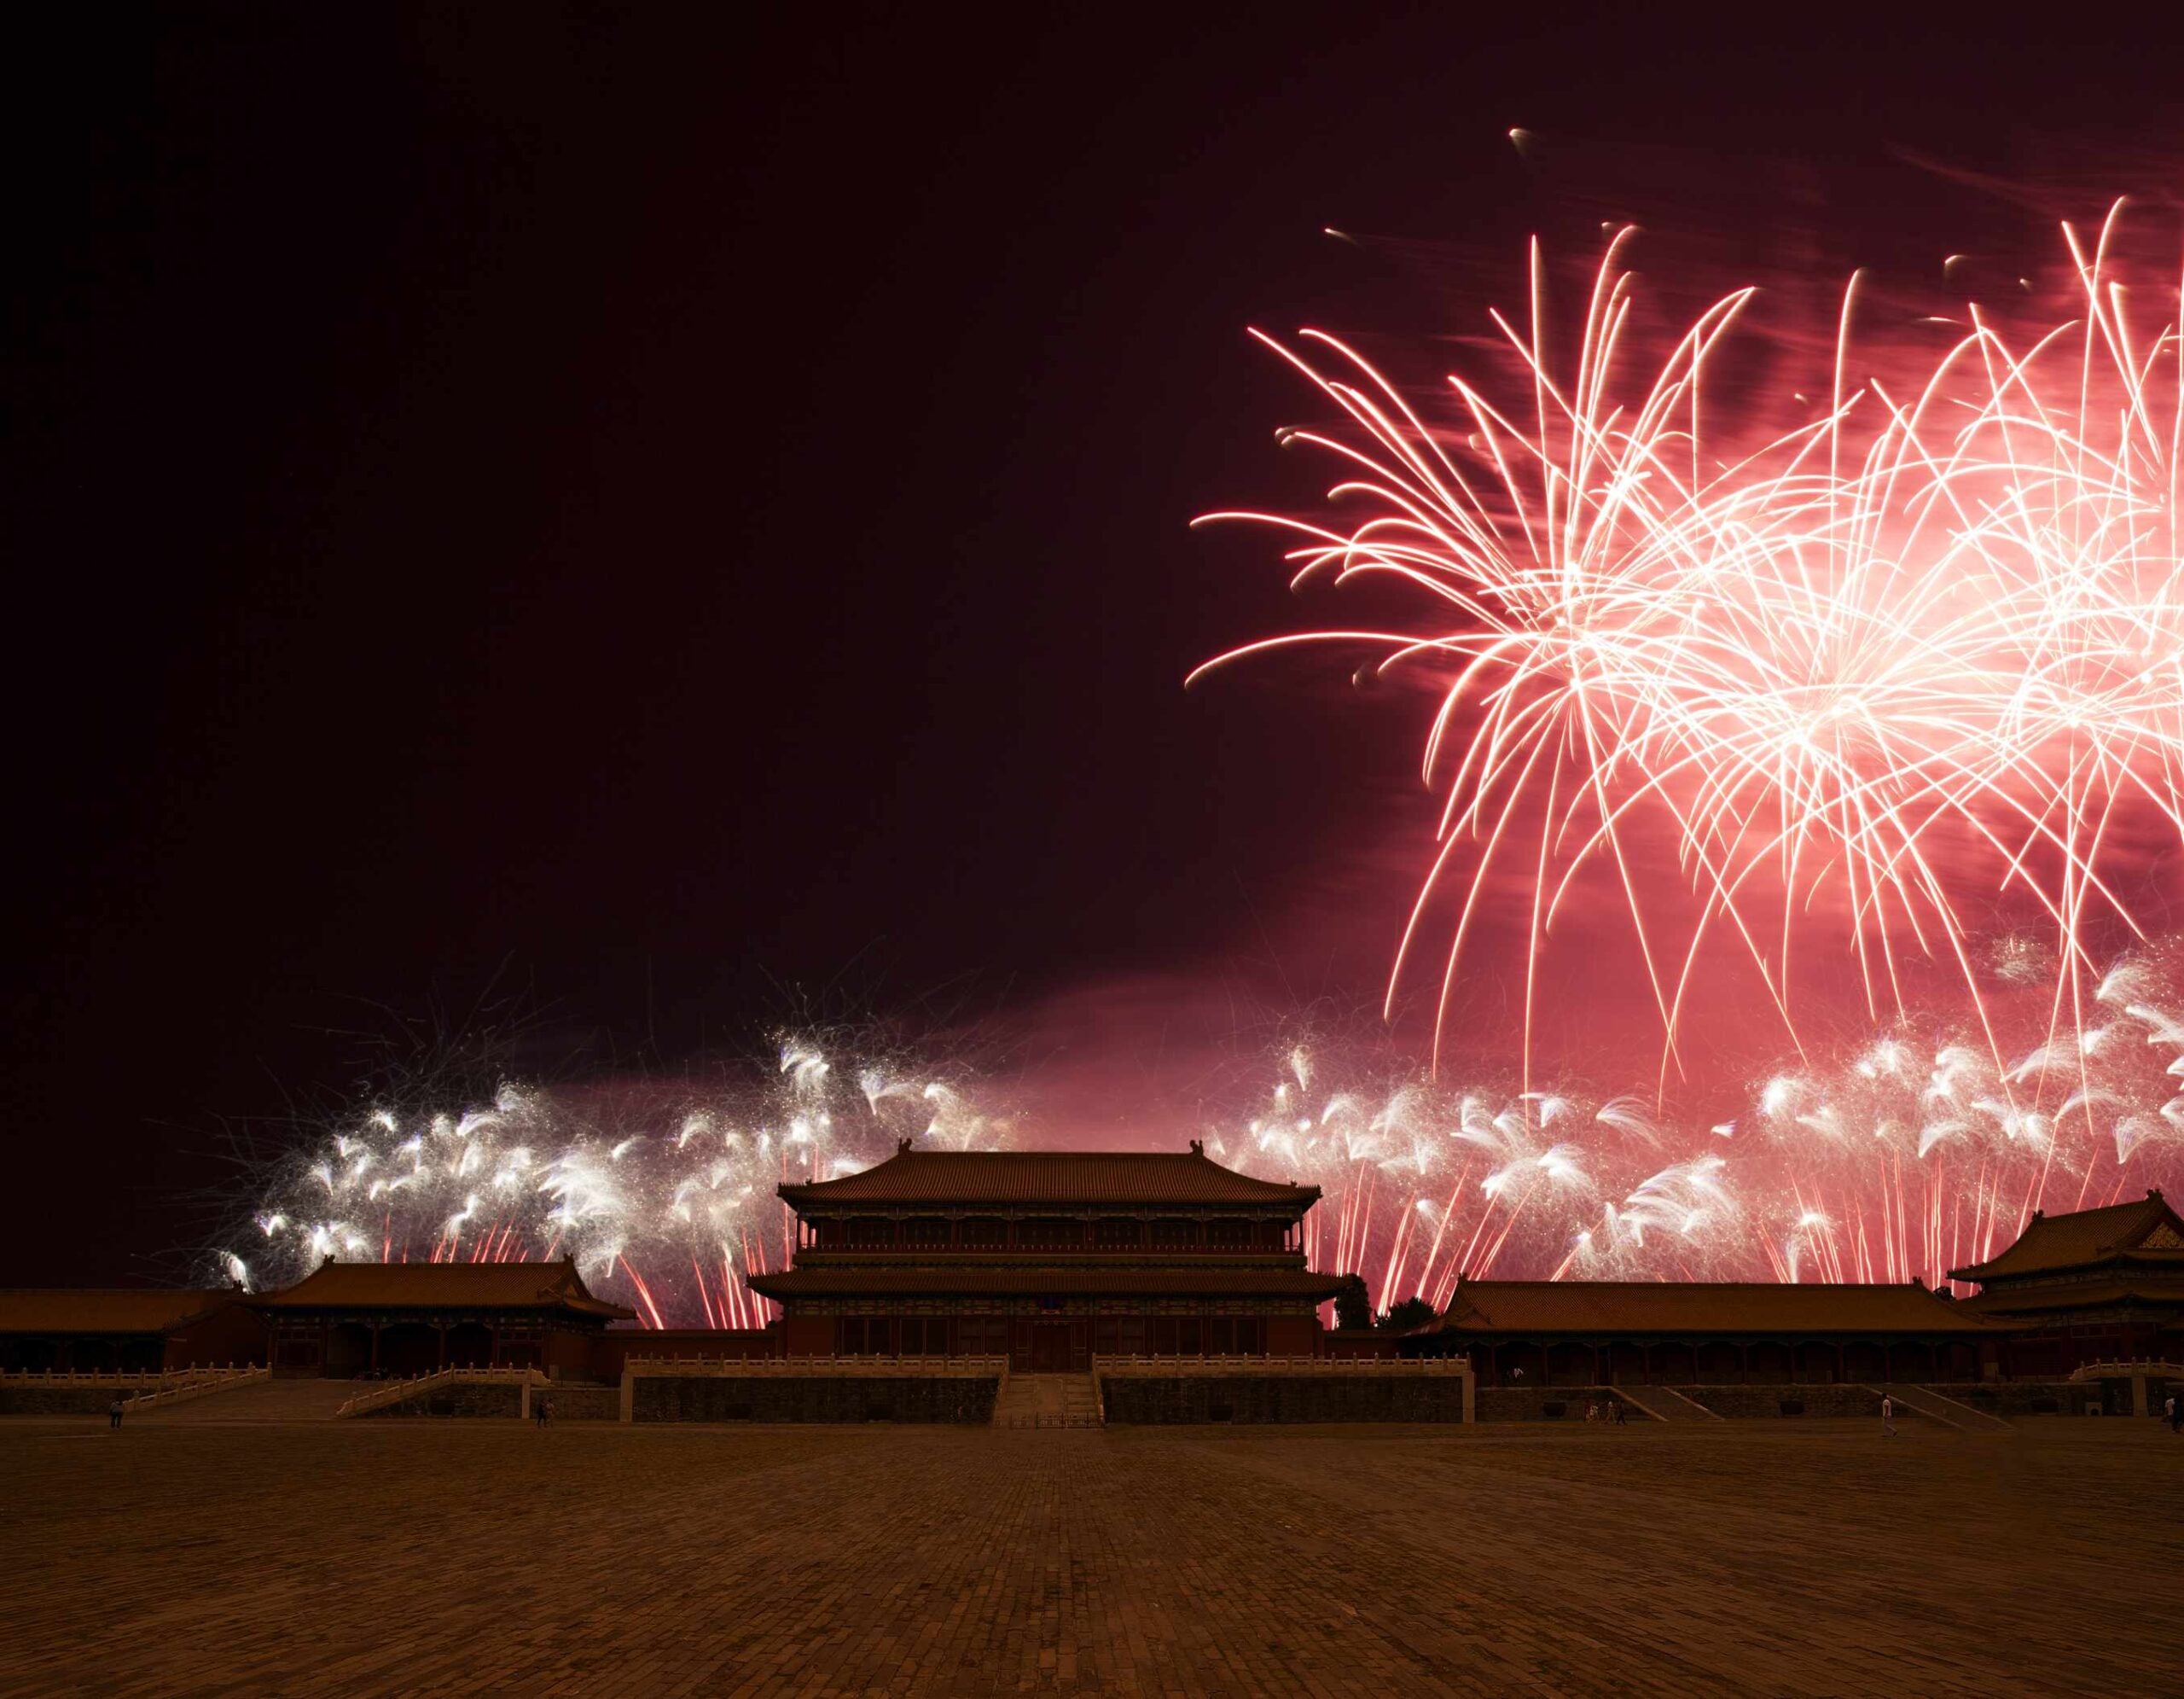 Fireworks in Beijing with temples